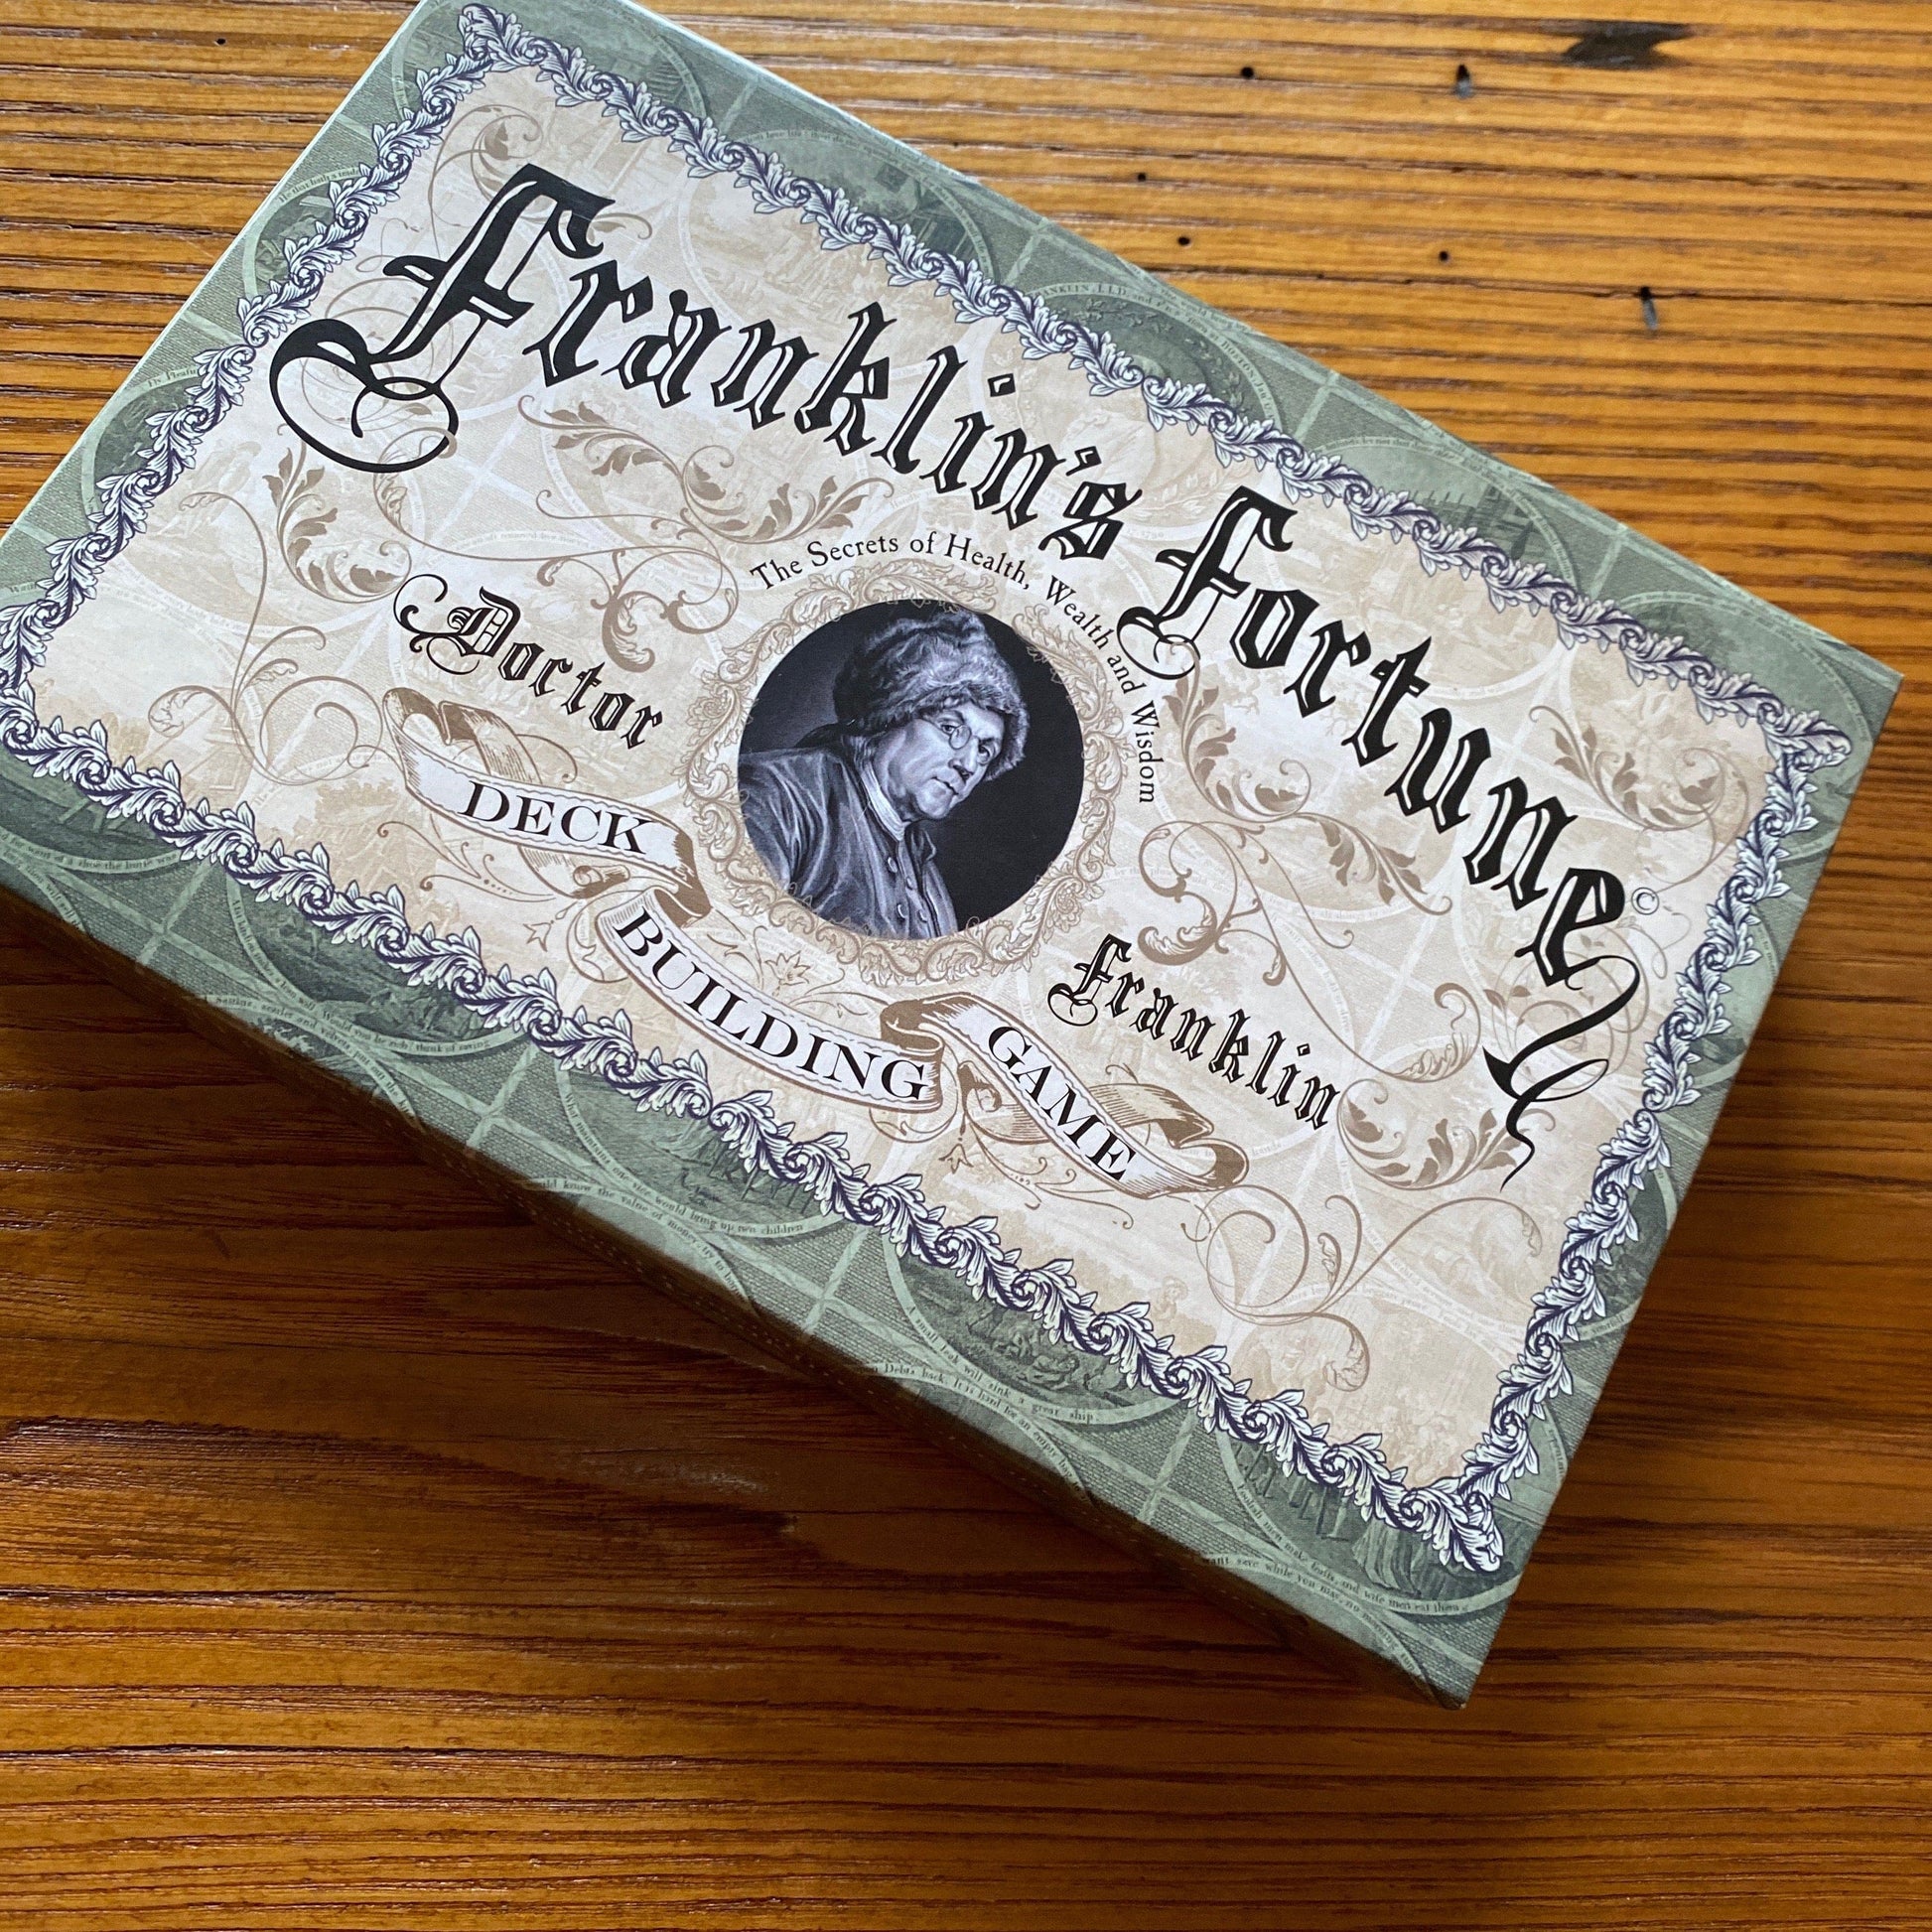 Box of Franklin's Fortune Card Game from The History List